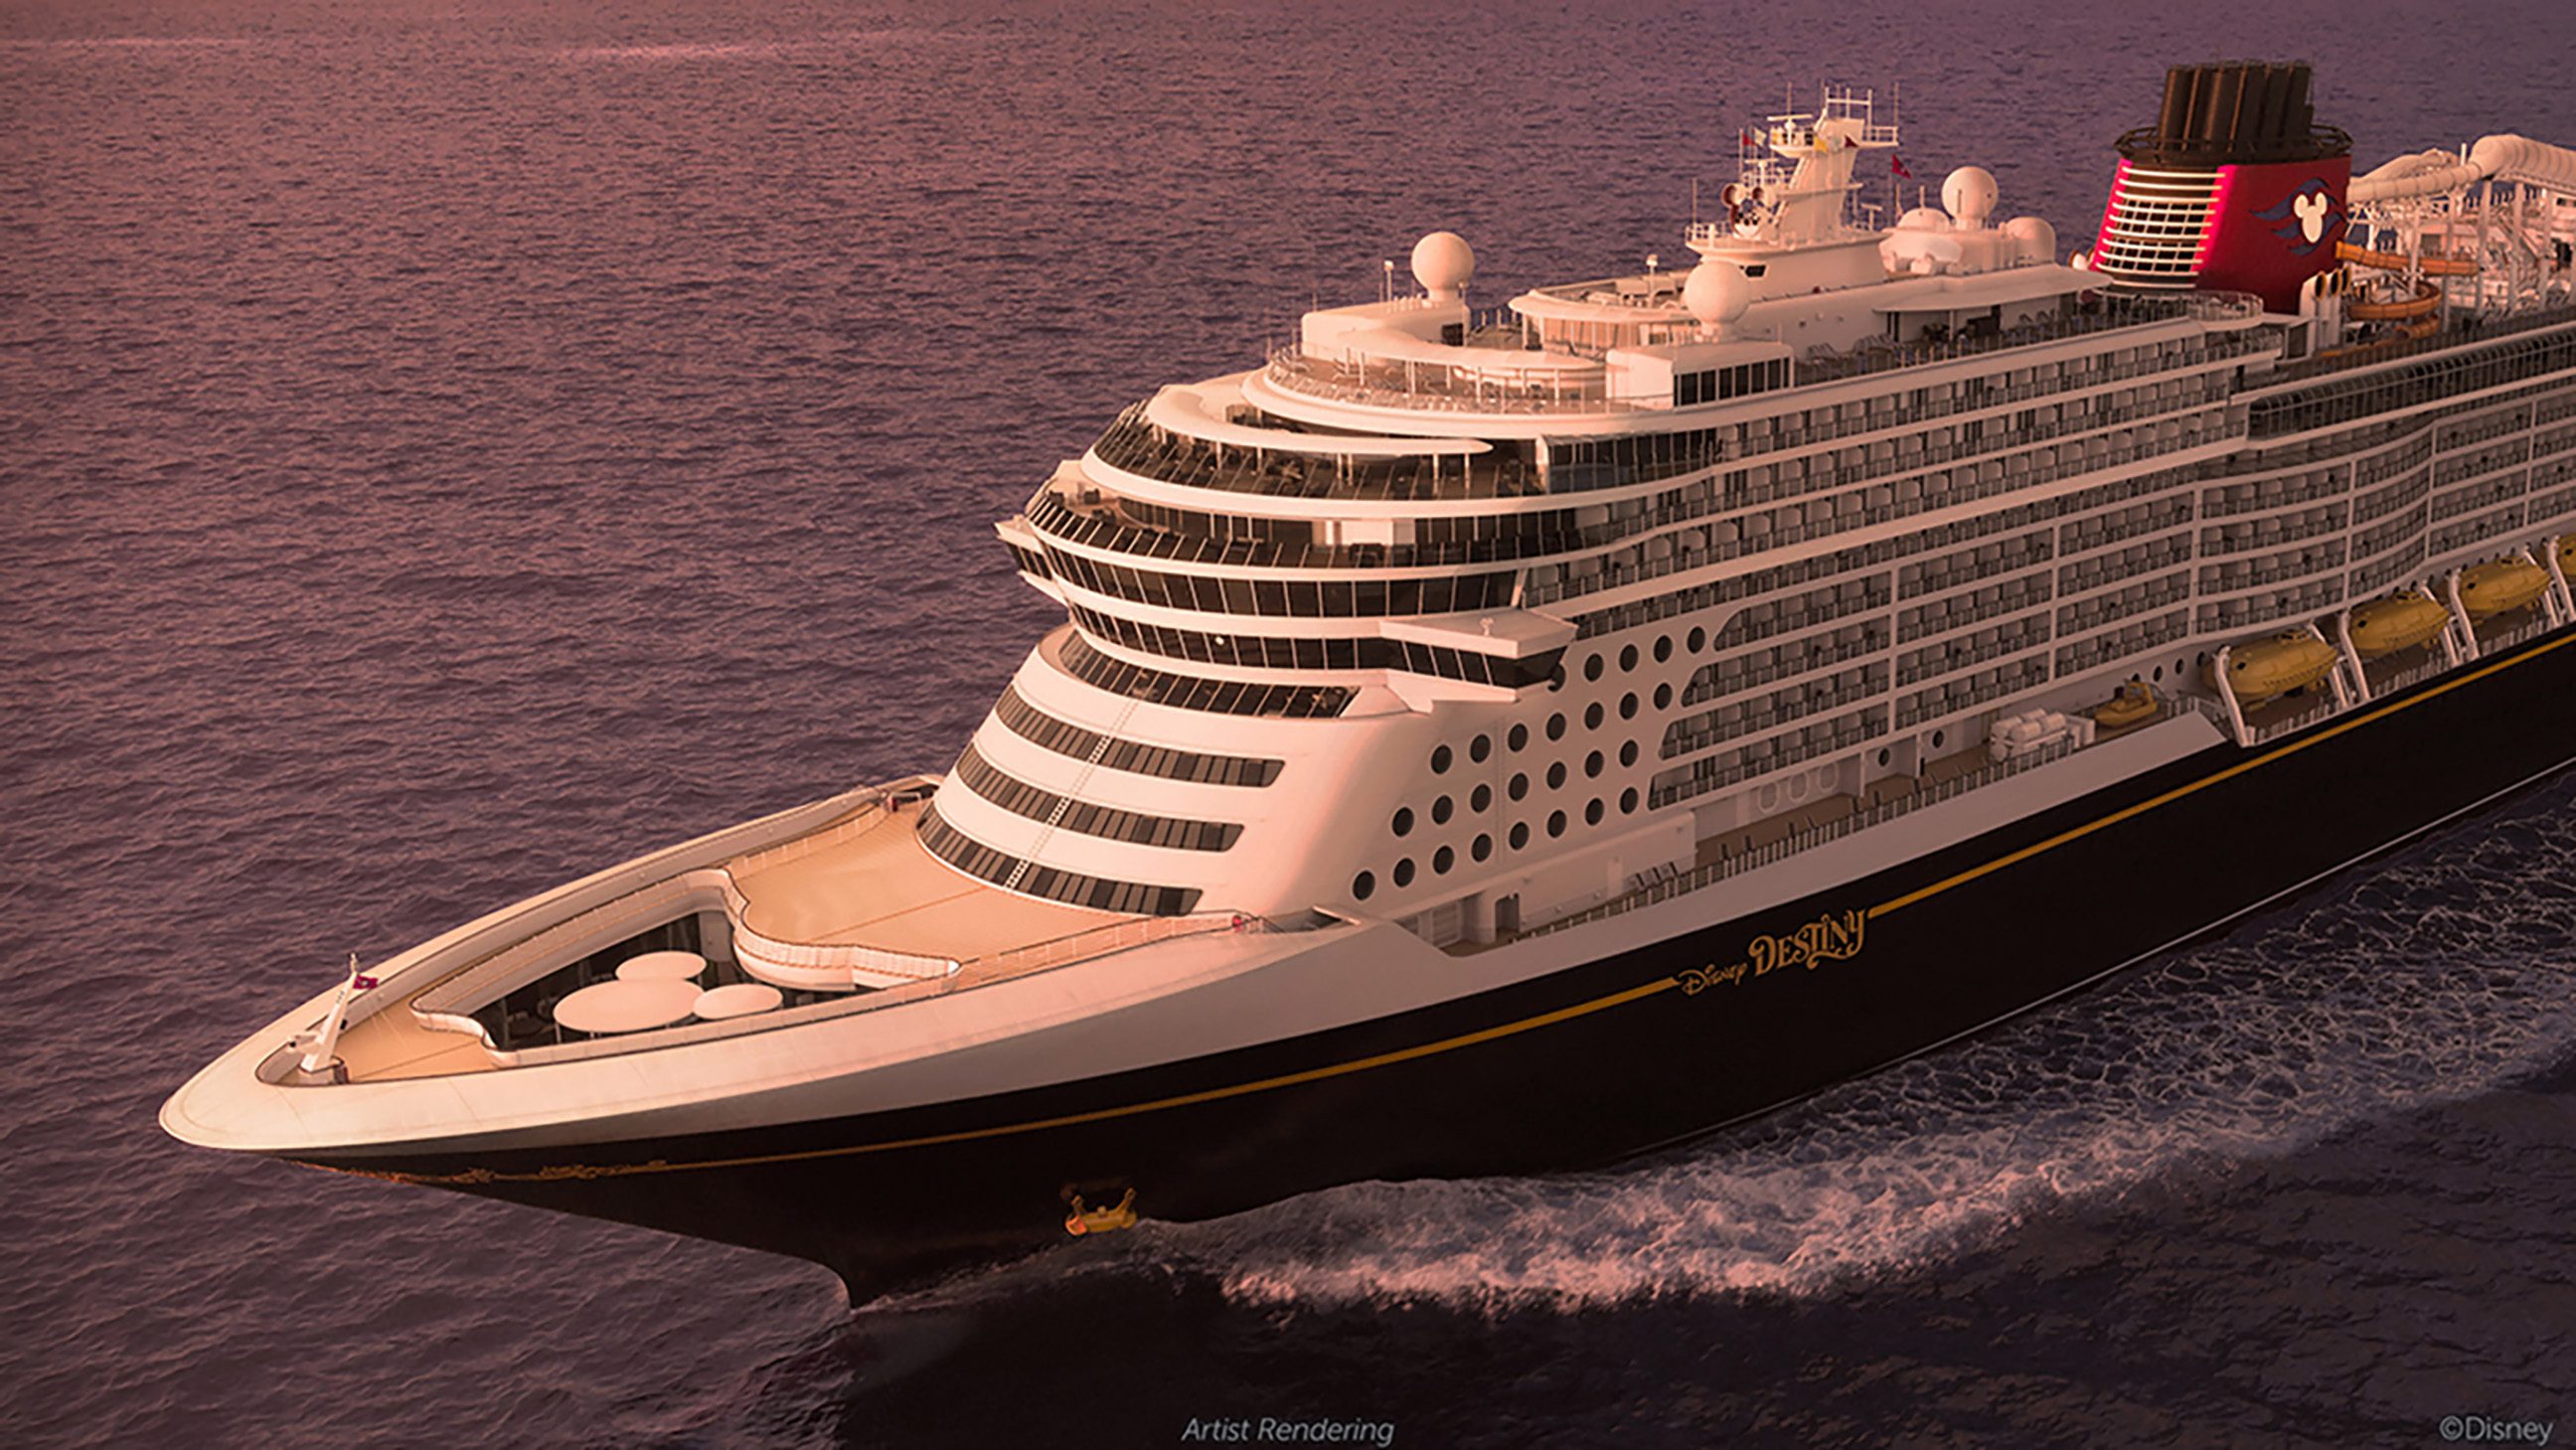 Disney announces new 'Heroes and Villains' themed cruise ship, the Disney Destiny, set to sail in 2025